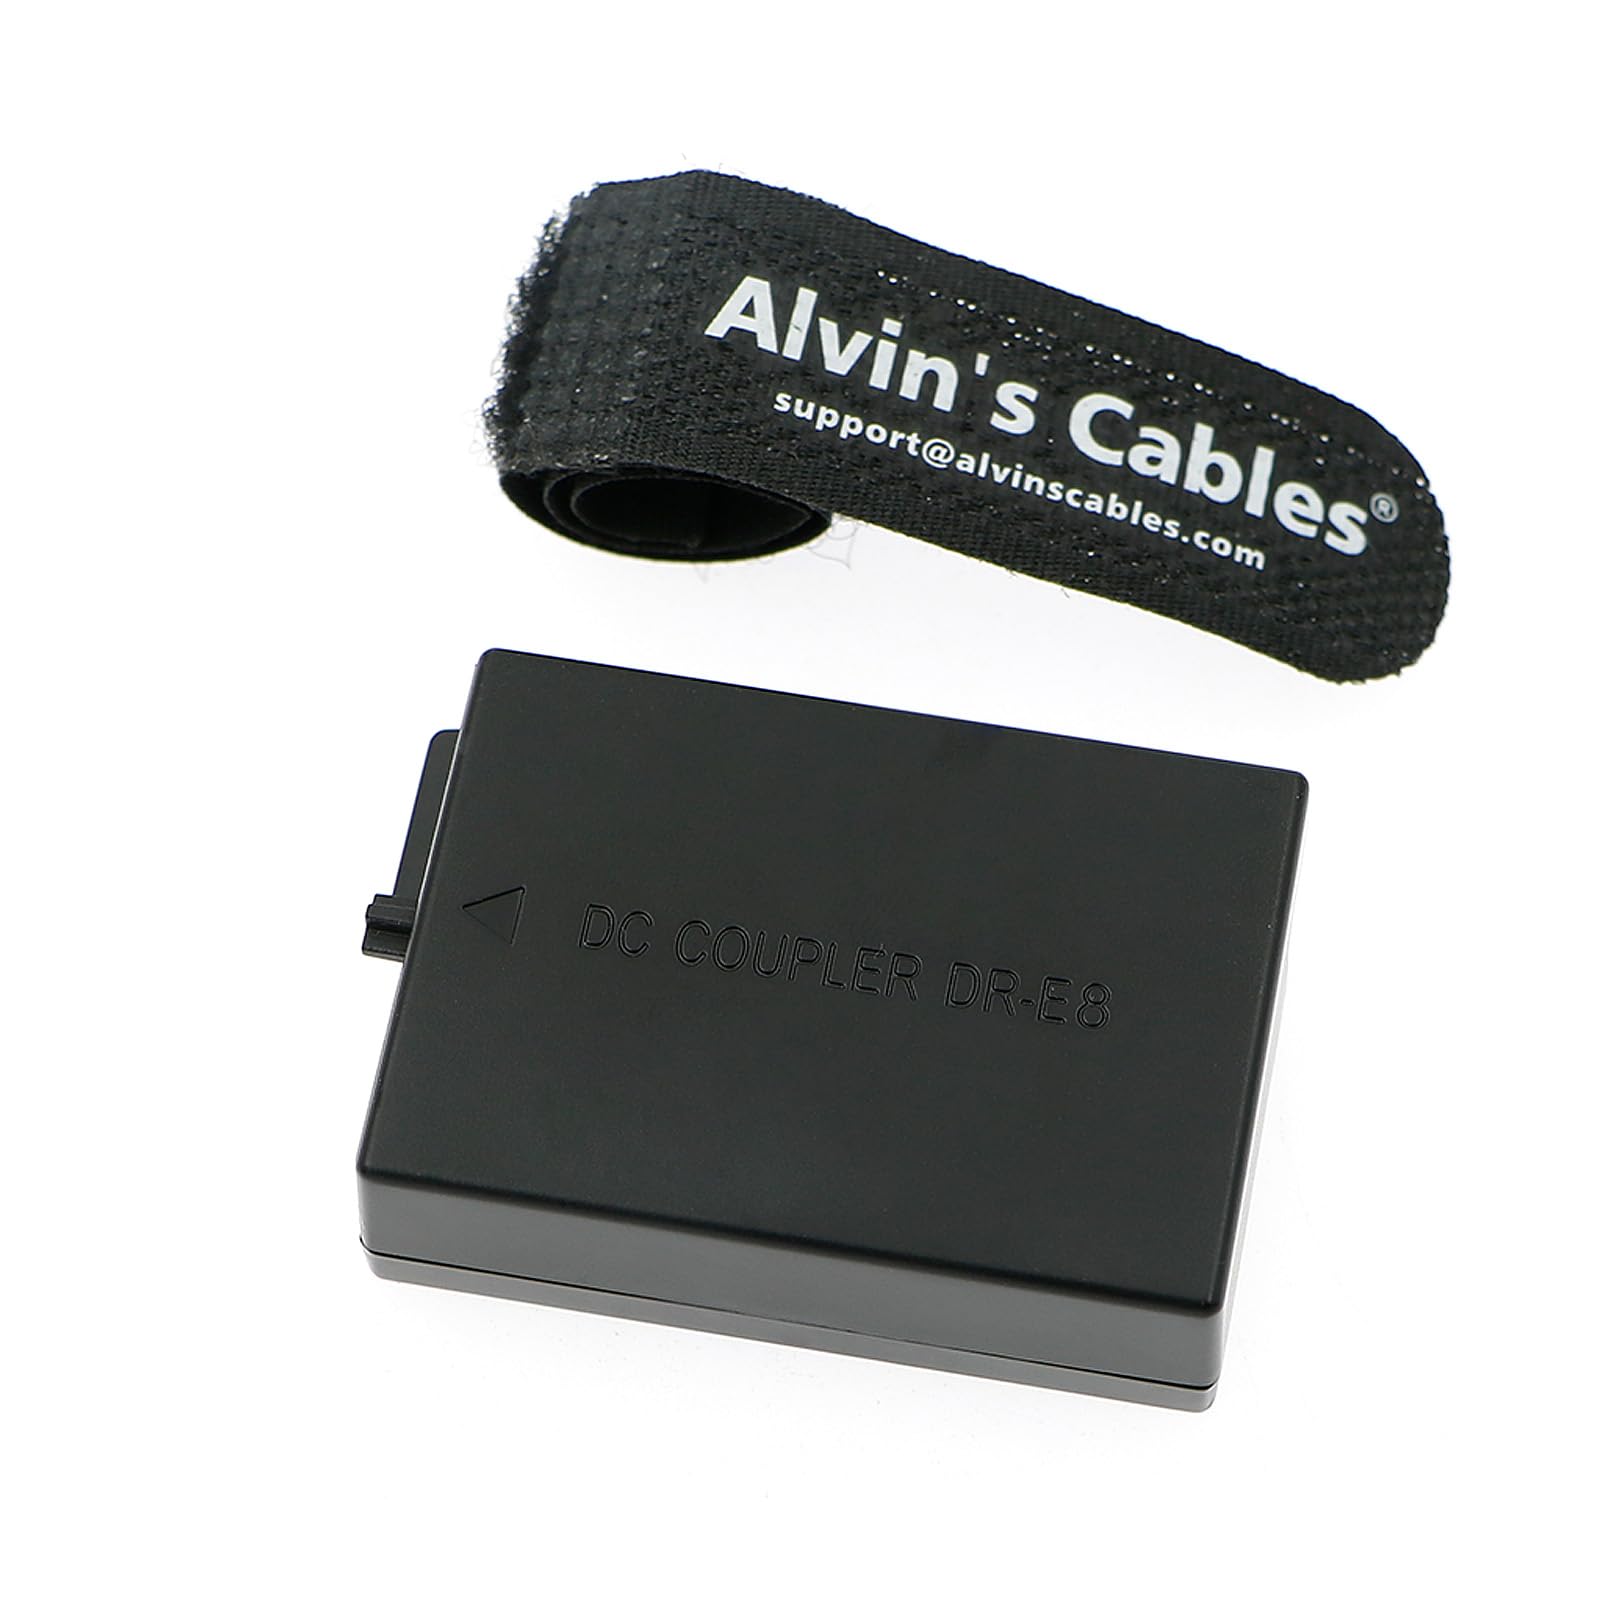 Alvin's Cables LP-E8 DR-E8 Dummy Battery to PD Type-C Decoded Power Cable for Canon EOS Rebel T5i T4i T3i T2i |Kiss X6 X5 X4 |700D 650D 600D 550D Cameras